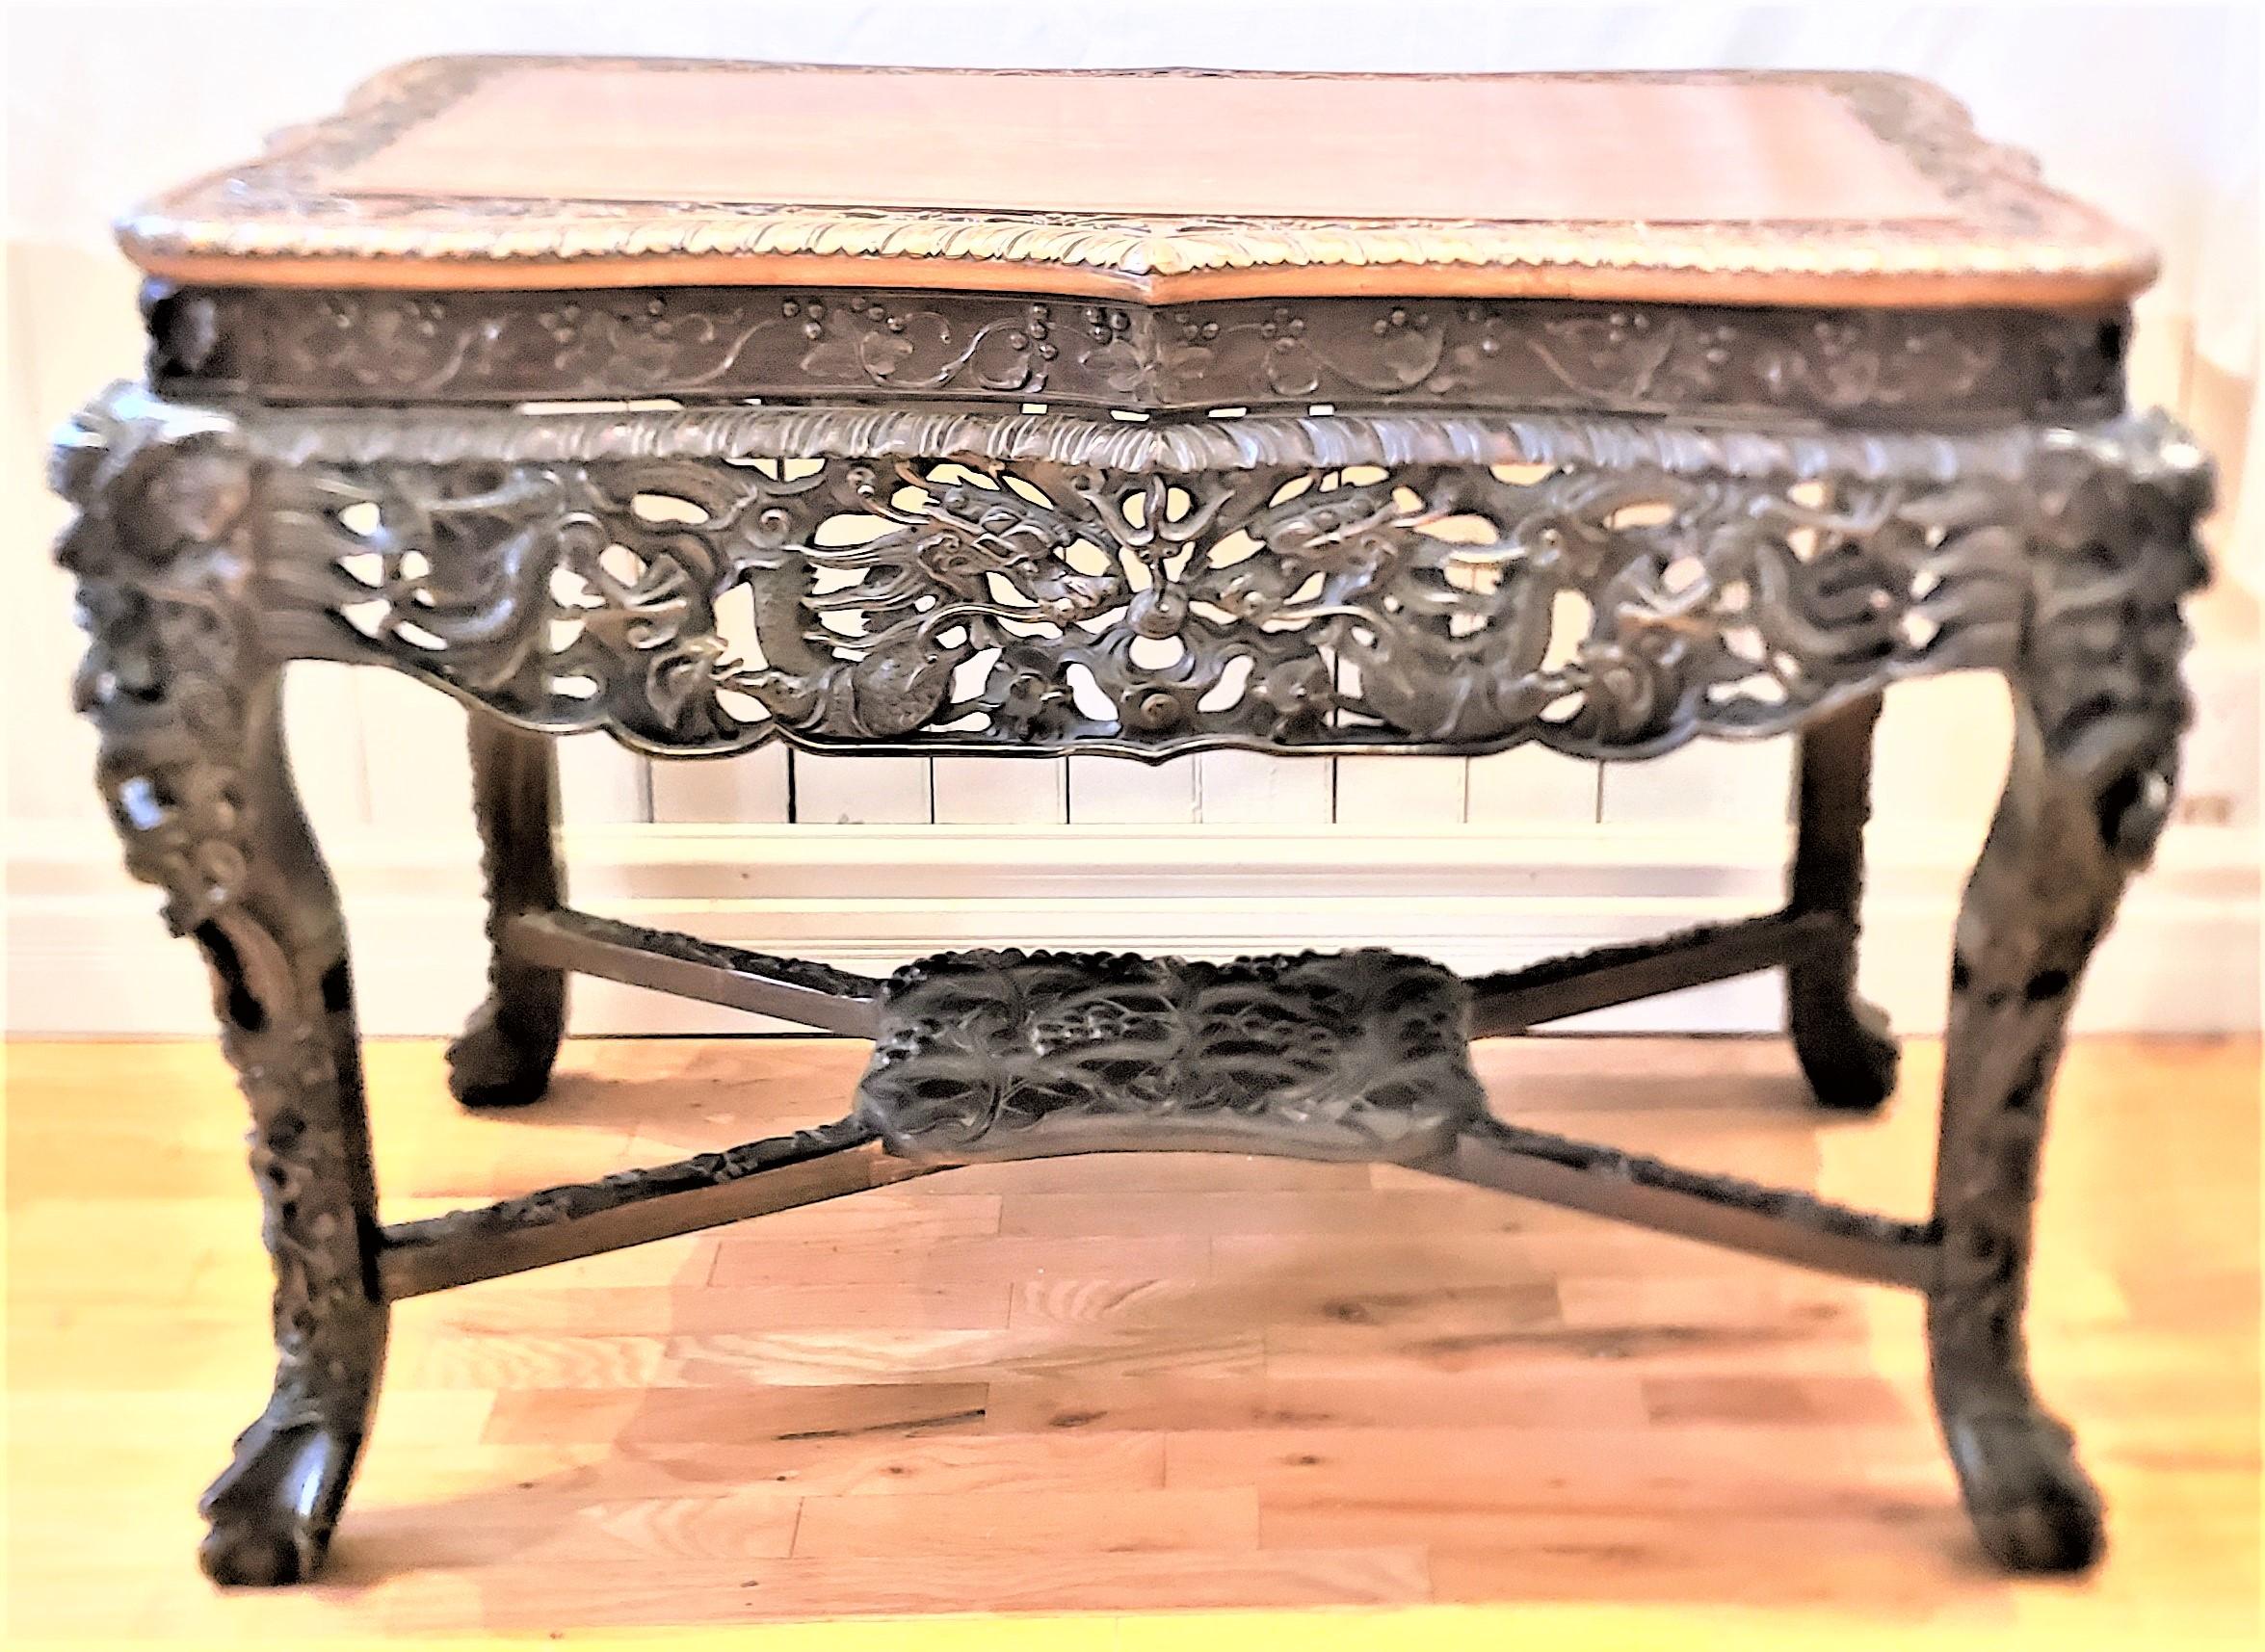 Antique Chinese Ornately Carved Writing or Accent Table with Dragons & Fruits For Sale 2